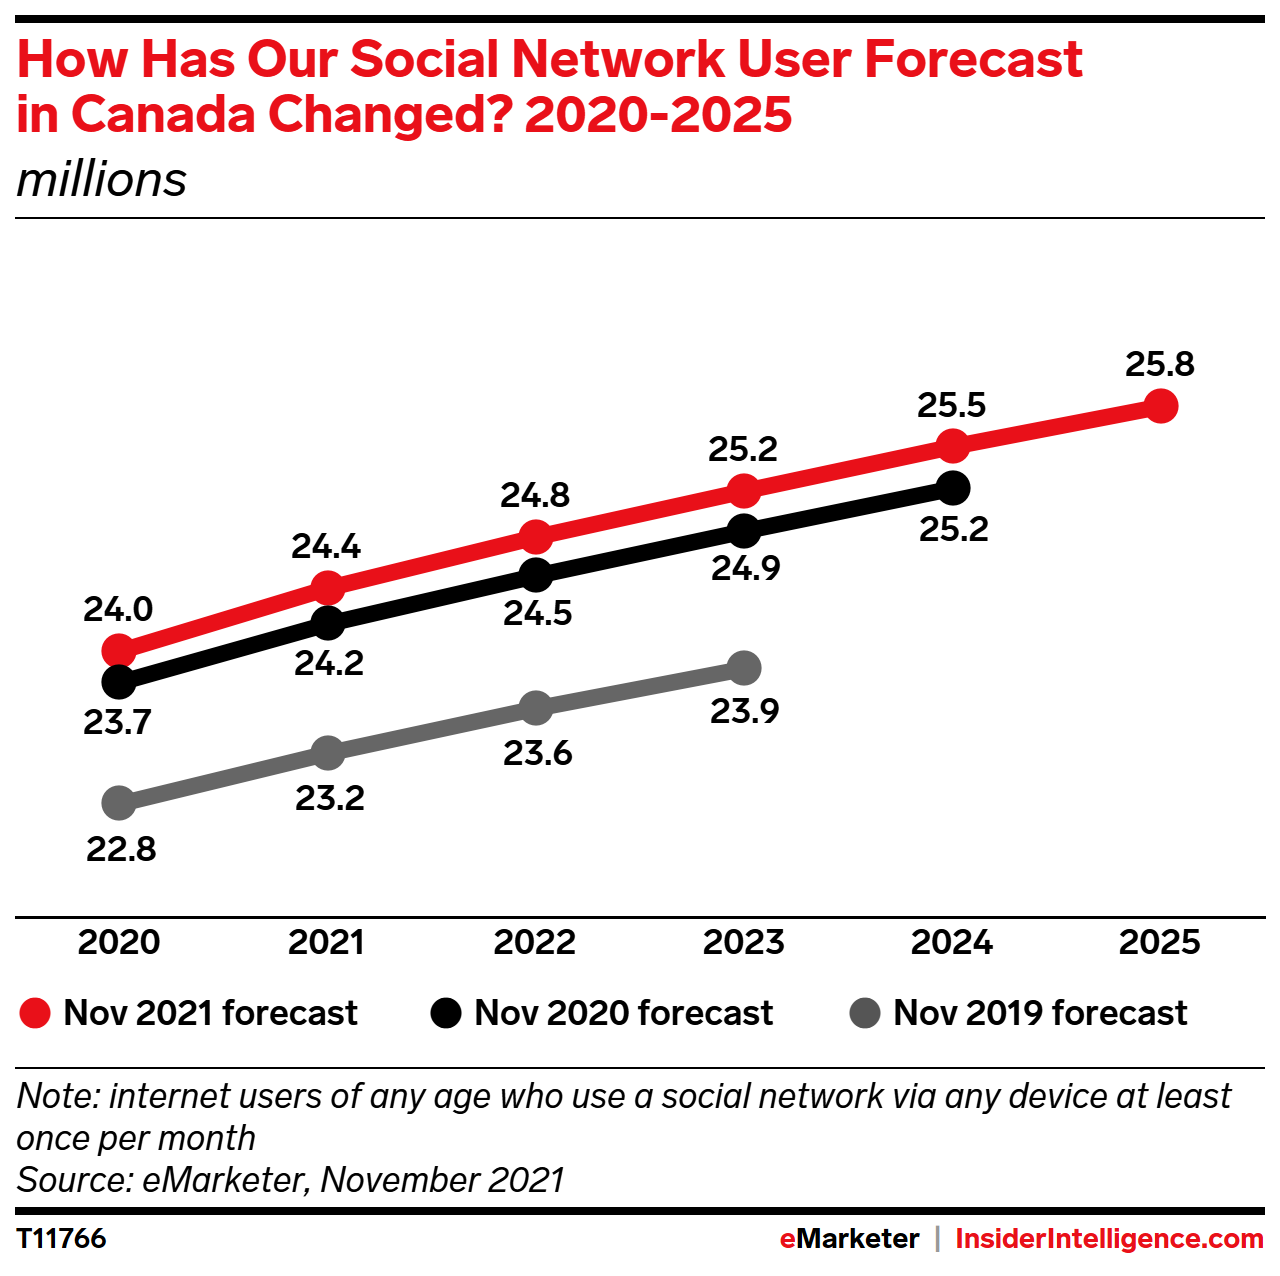 How Has Our Forecast for Social Network Users in Canada Changed? 2020-2025 (millions)